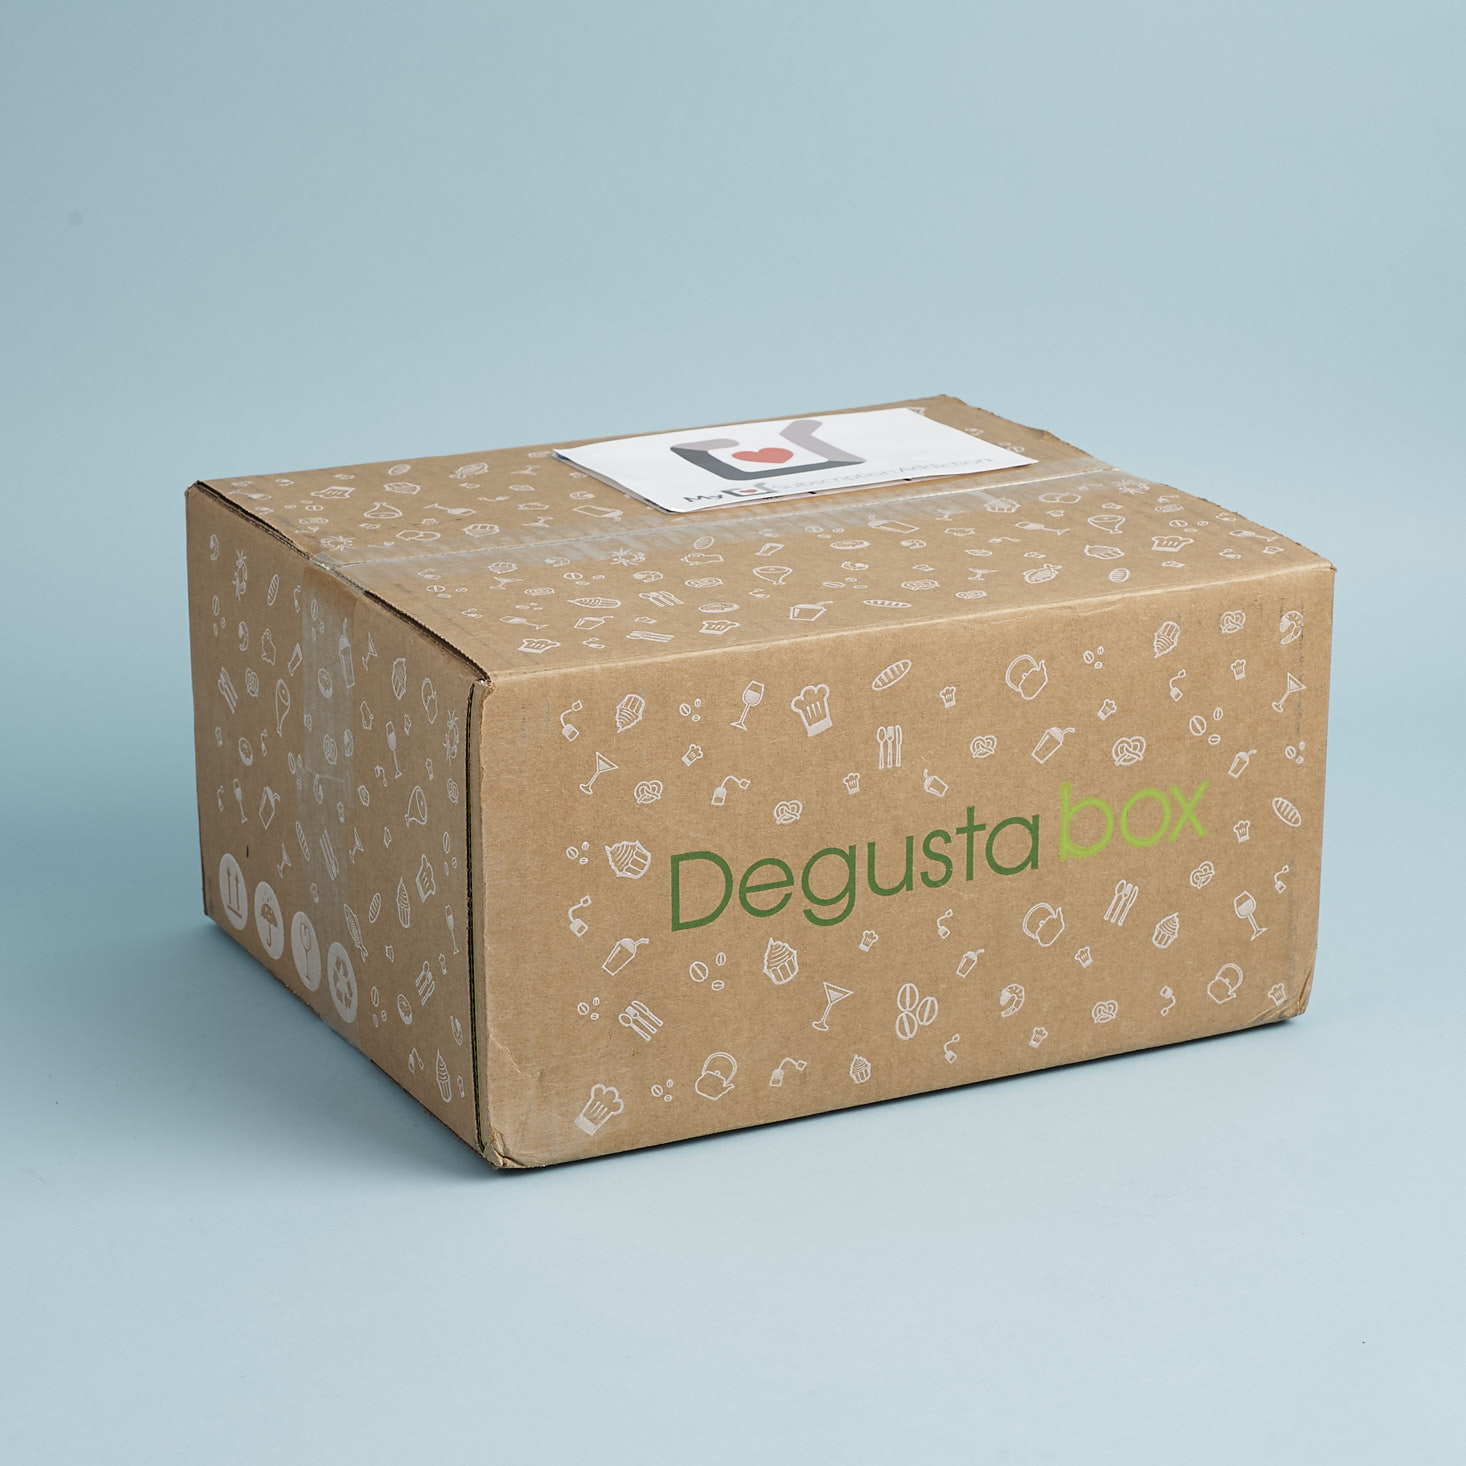 Degustabox Food Subscription Review + Coupon – February 2018